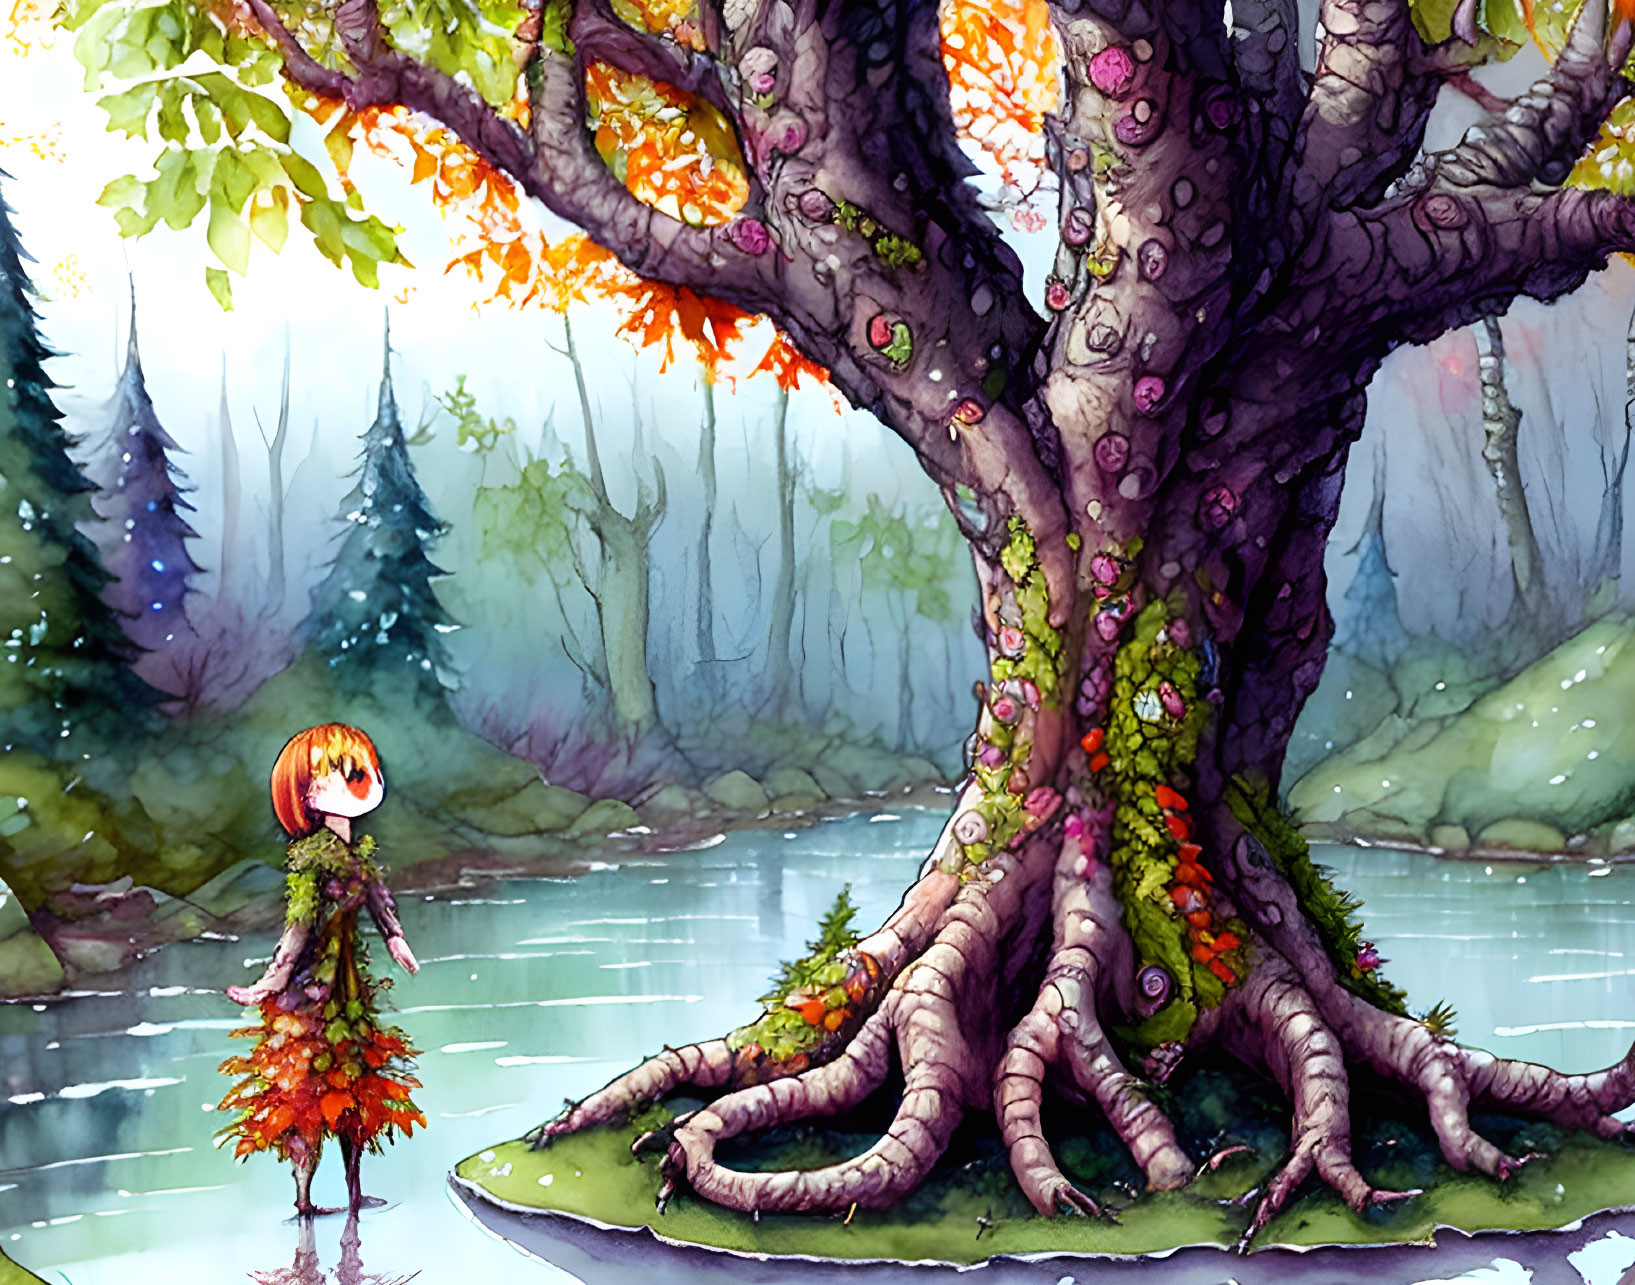 Colorful Illustration: Child-like Figure with Pumpkin Head by Flower-Adorned Tree on Is